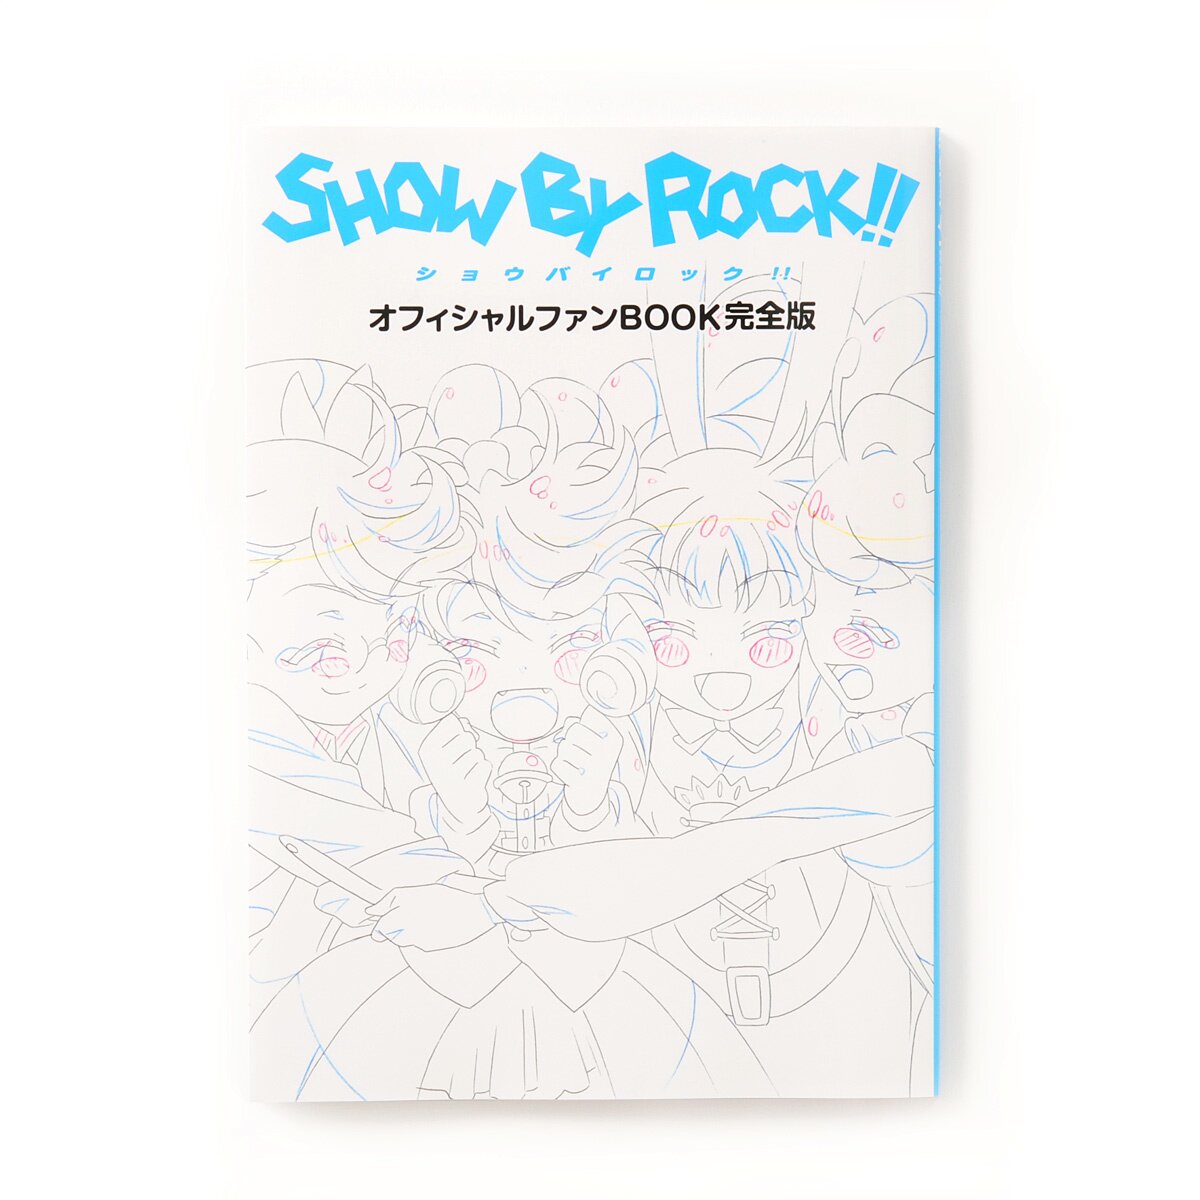 SHOW BY ROCK!! OFFICIAL ART BOOK Sanrio Game Anime Character Illustration  Japan